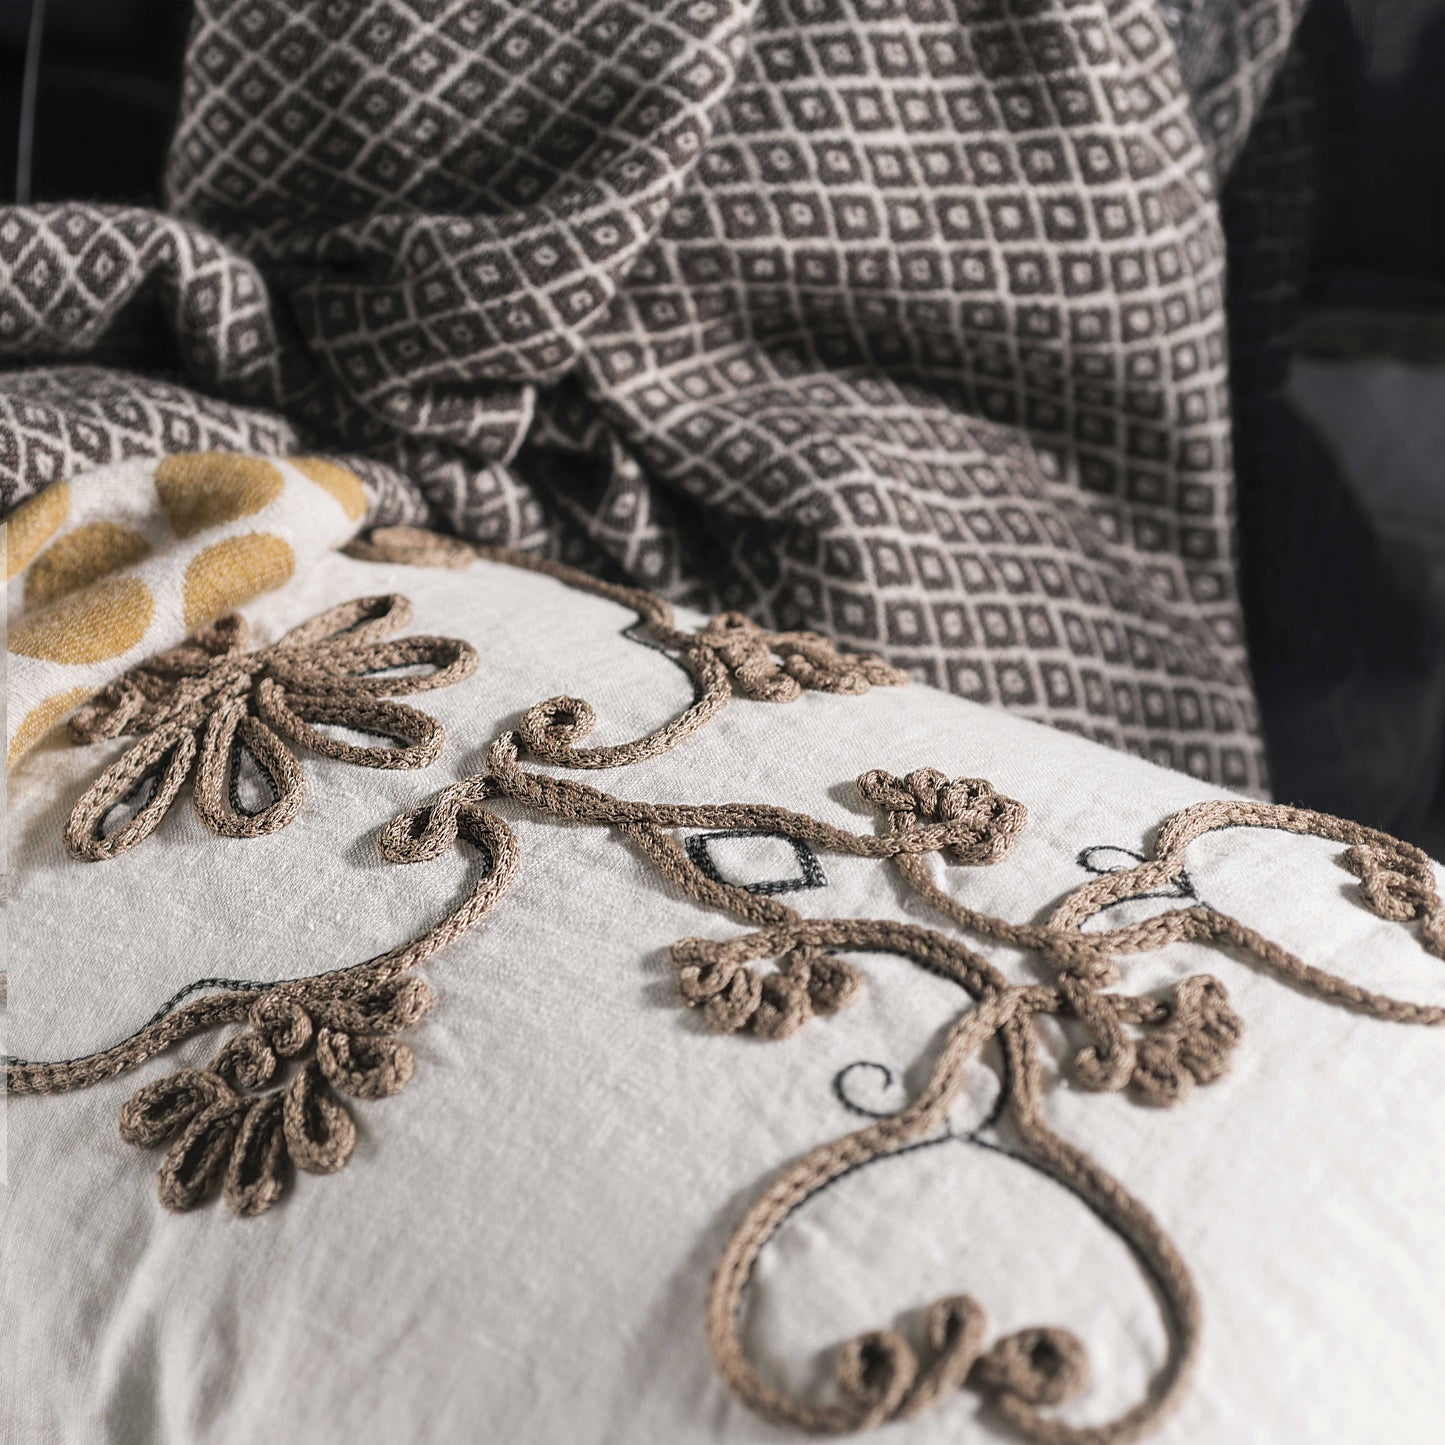 Linen pillowcase with Heraldic cornely embroidery